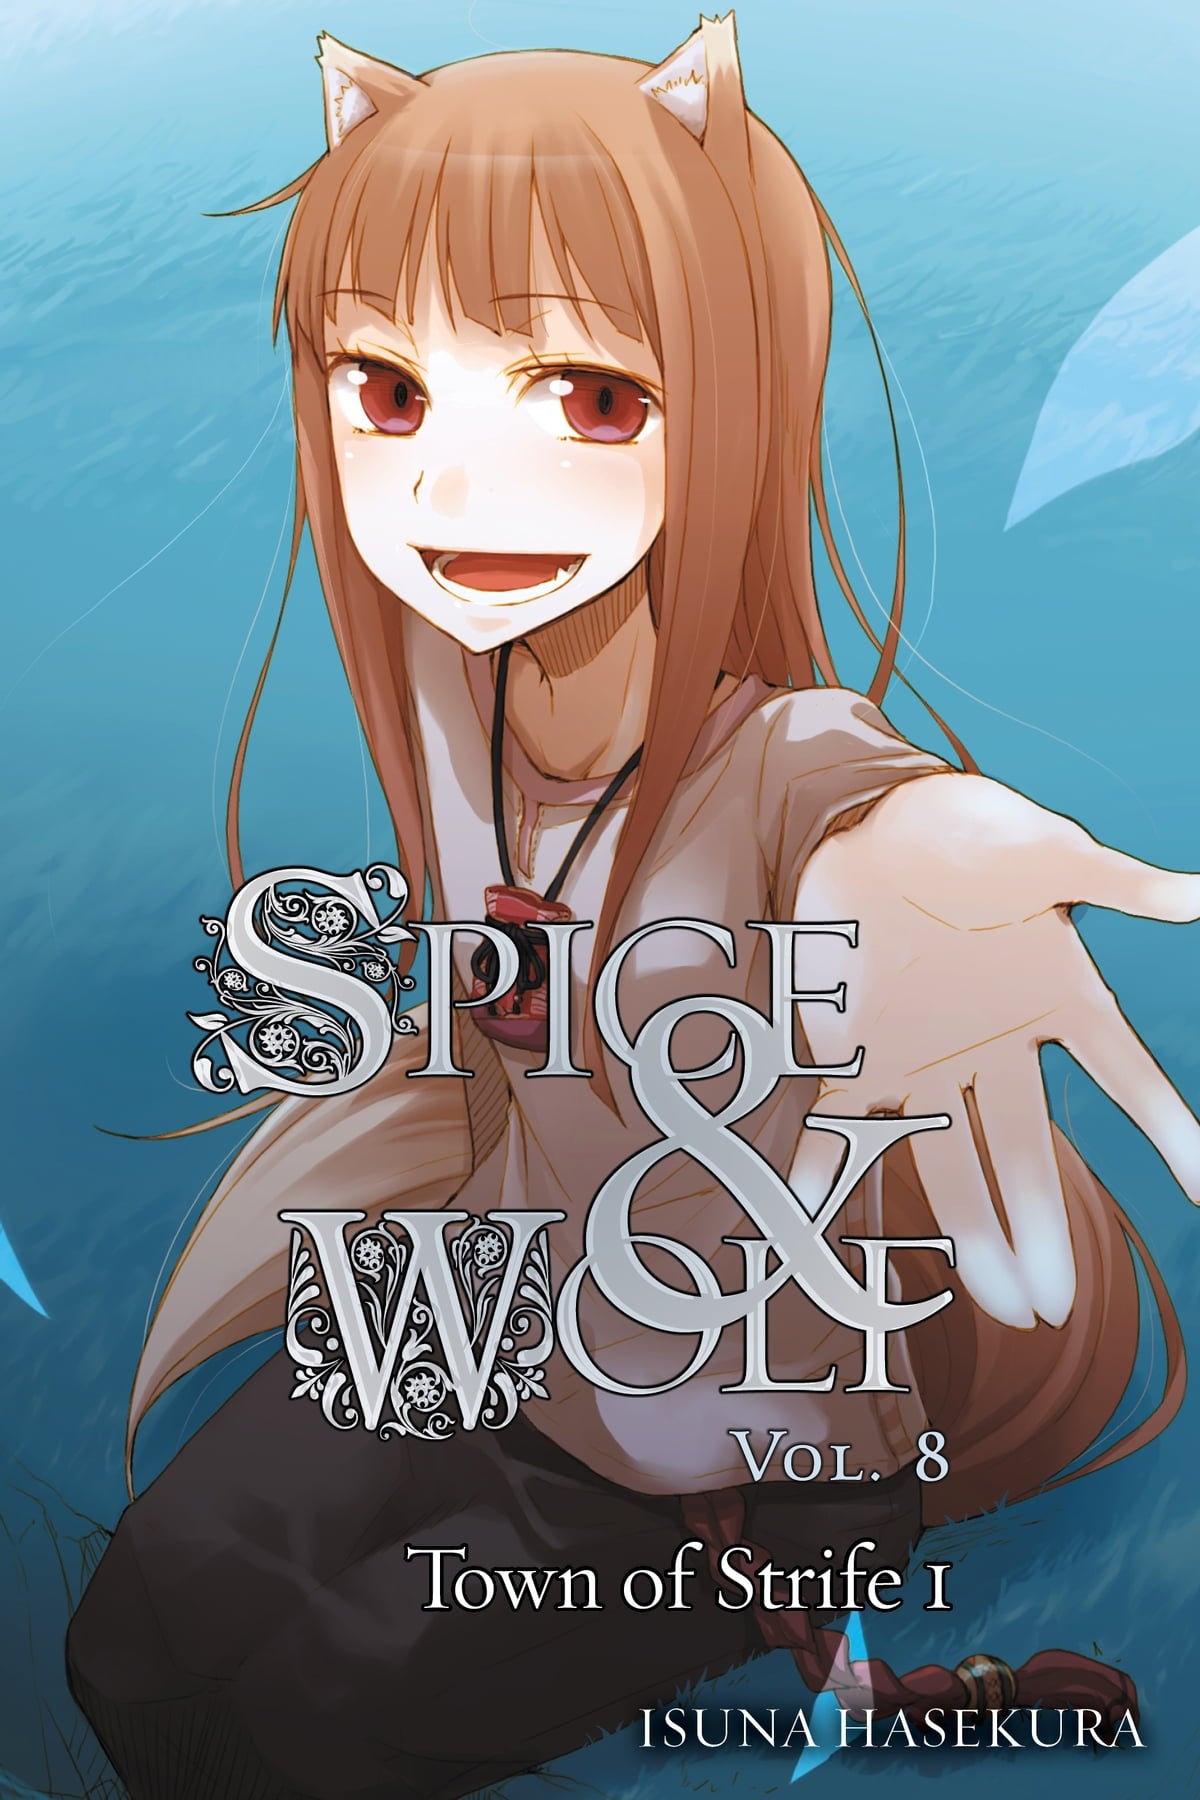 Spice and Wolf Vol. 08: The Town of Strife I